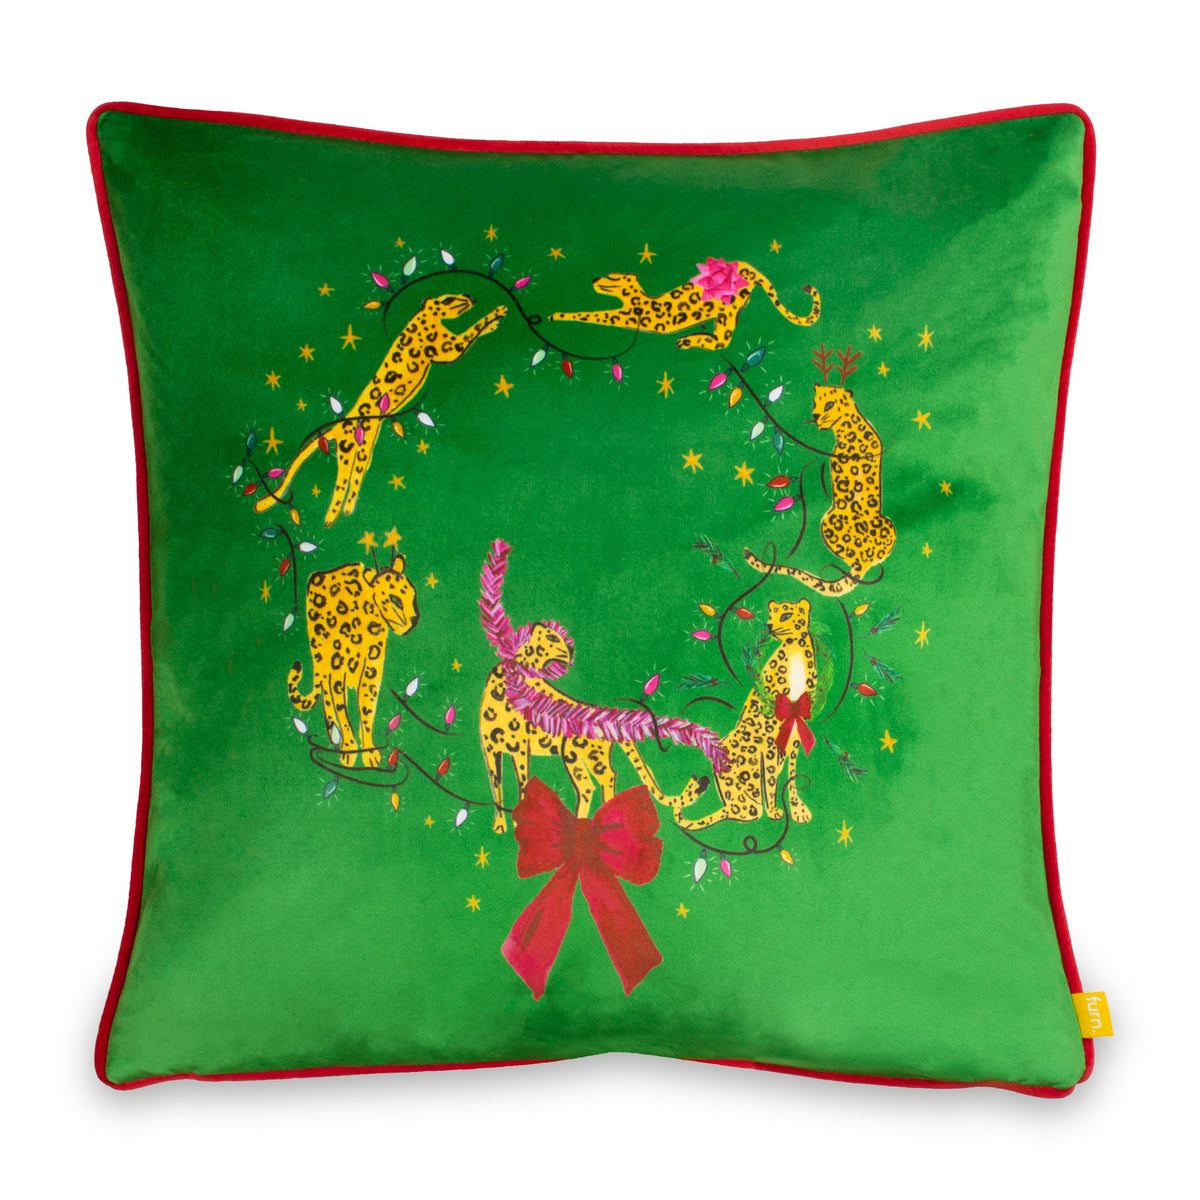 Purrfect Leaping Leopards 43x43 Cushion by Roseland Furniture